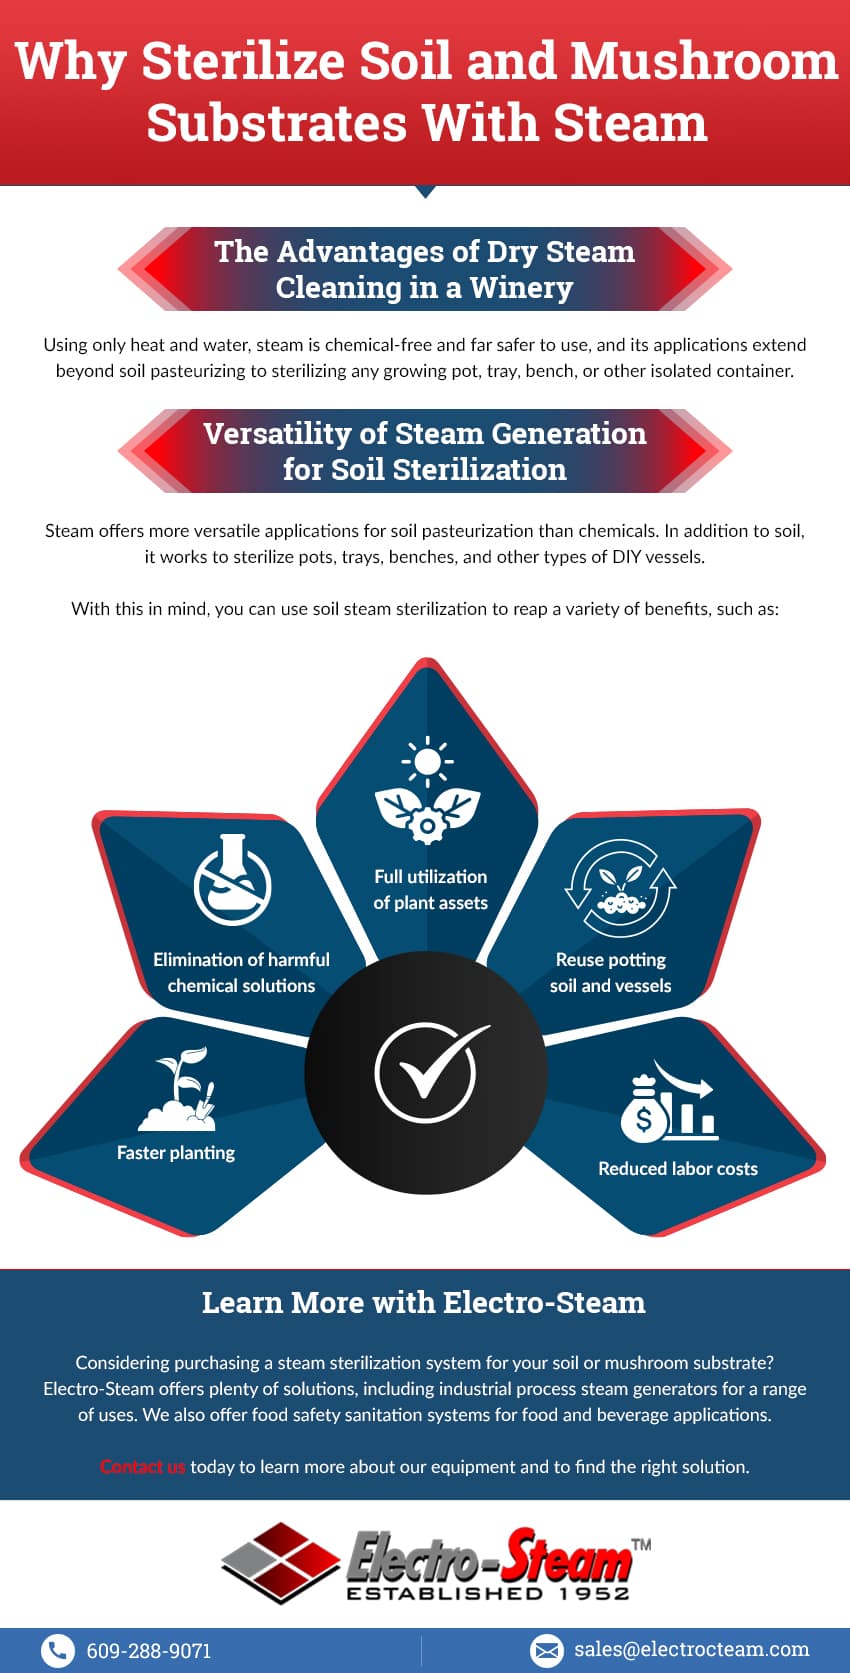 Why Sterilize Soil and Mushroom Substrates With Steam